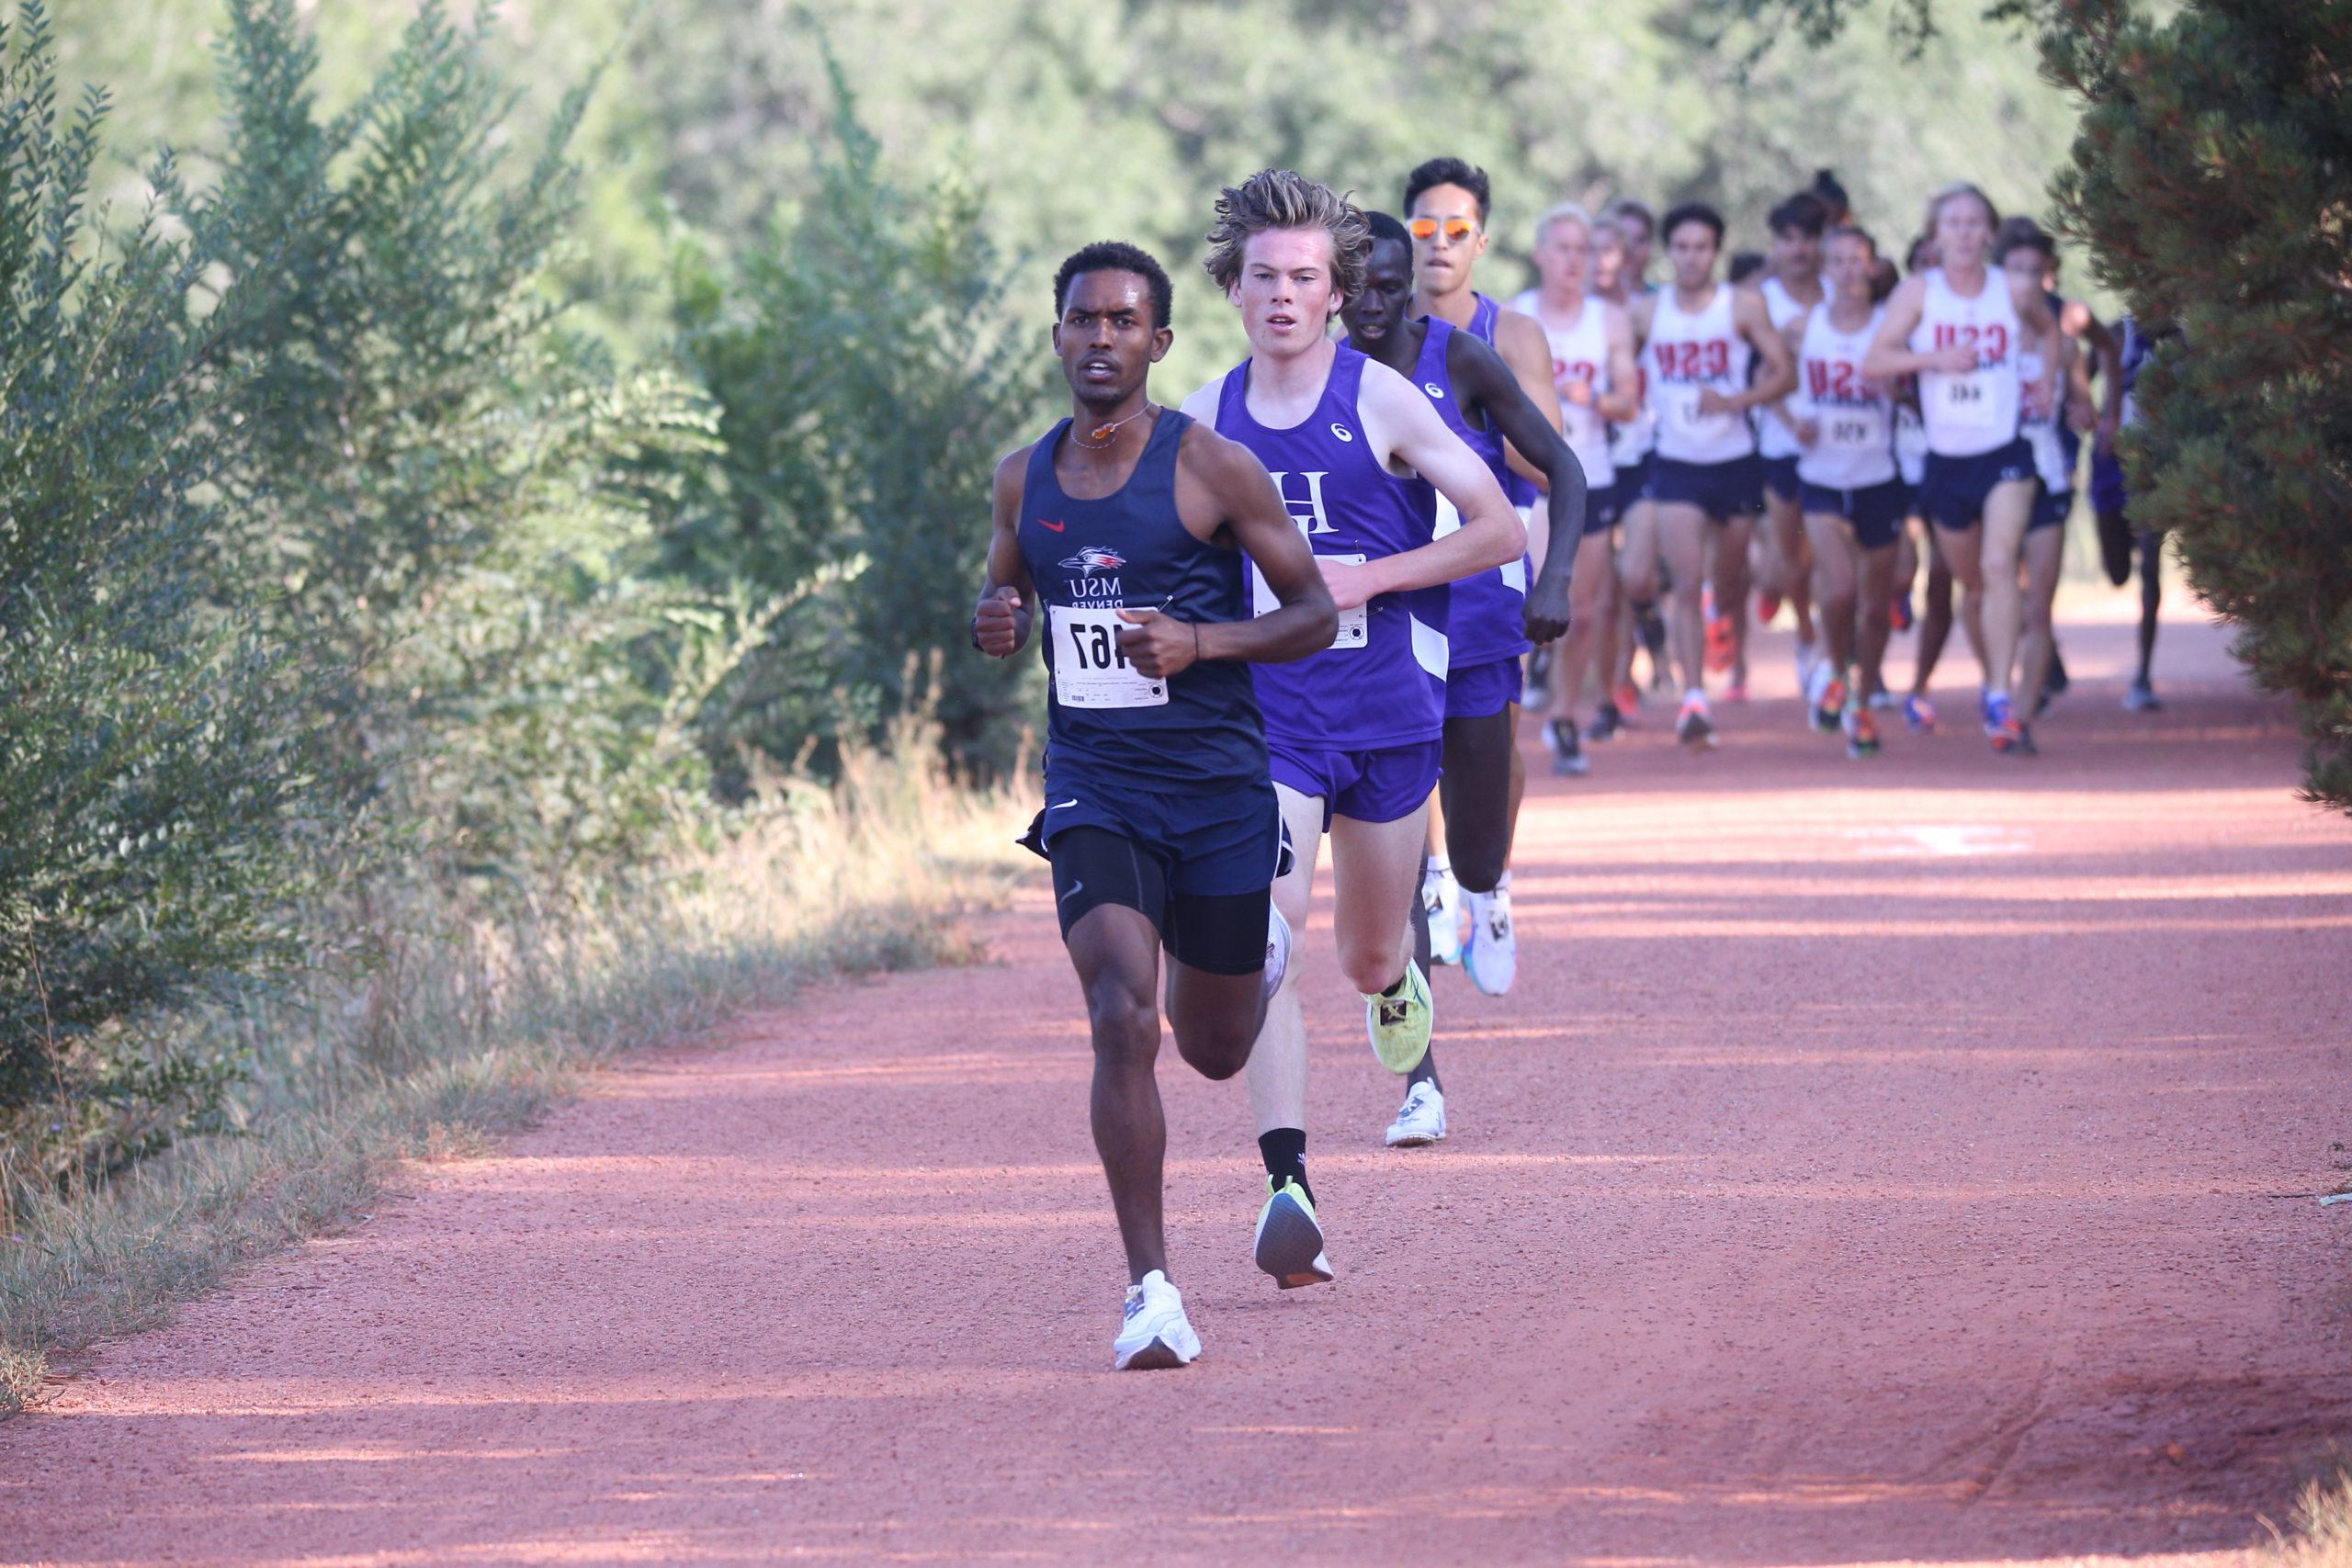 Men's cross country runner Yoni Kefle leads a large pack of runners at a race in 2021.